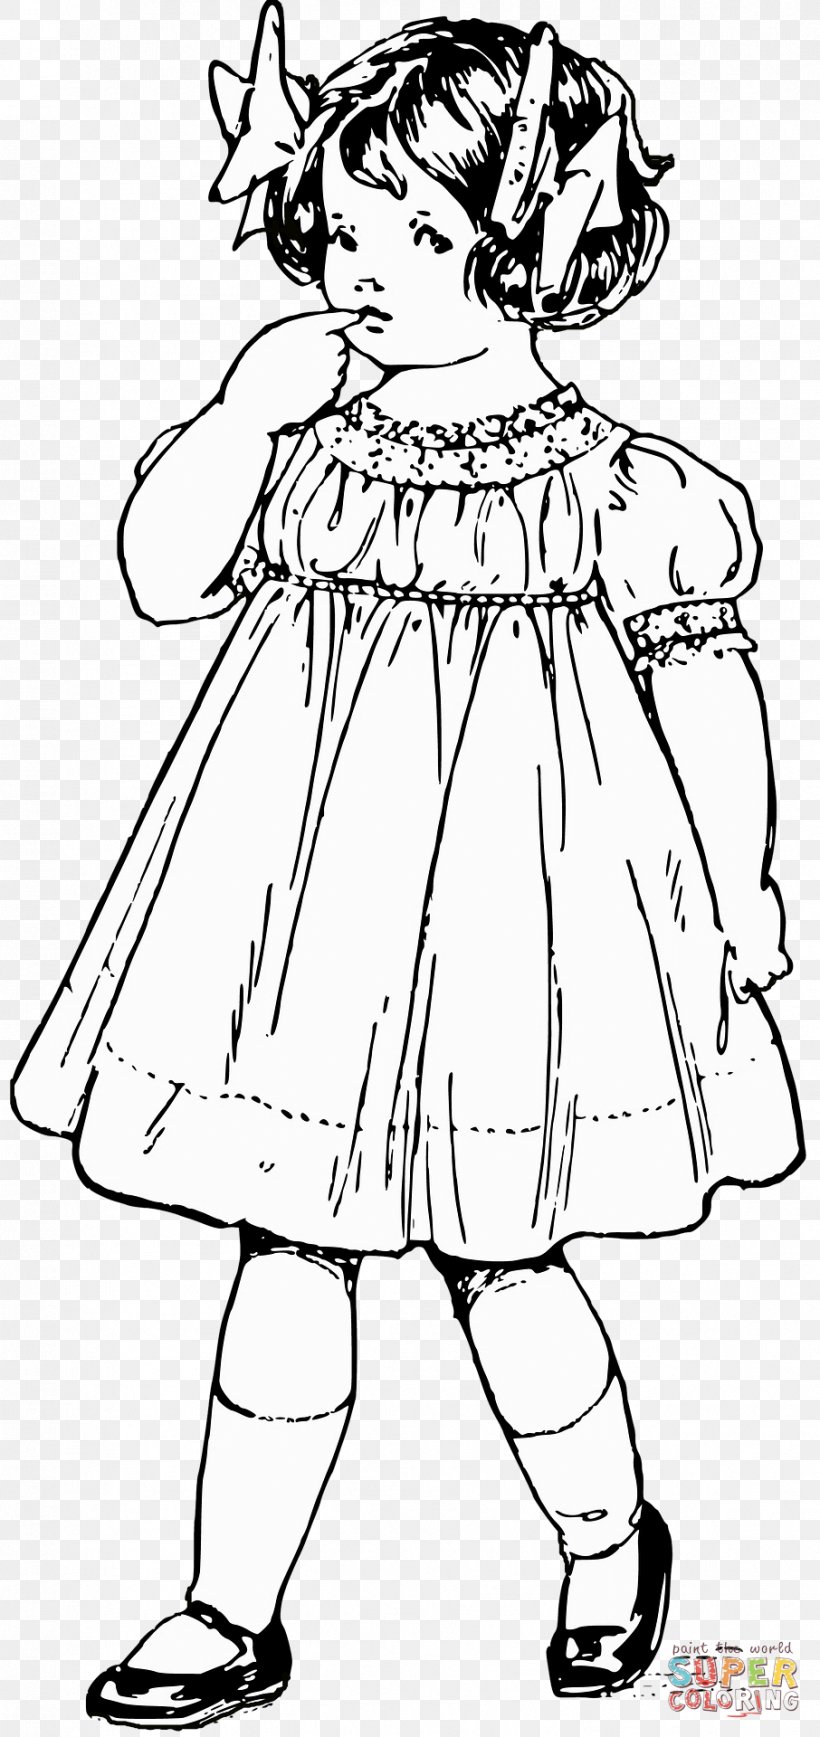 Black And White Line Art Woman Dress Drawing, PNG, 906x1920px, Black And White, Art, Artwork, Black, Cartoon Download Free